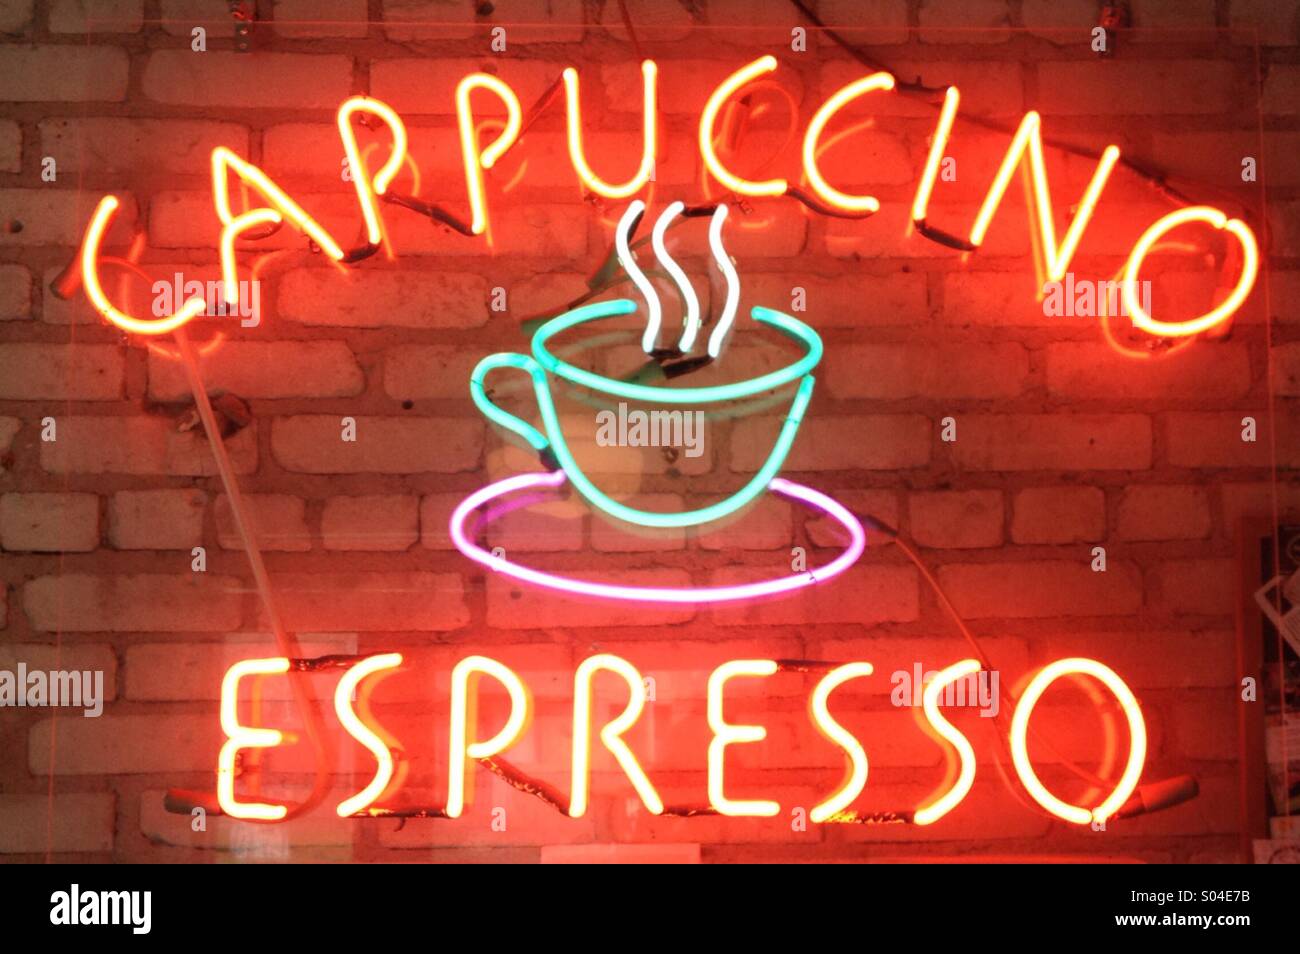 A neon coffee shop sign Stock Photo